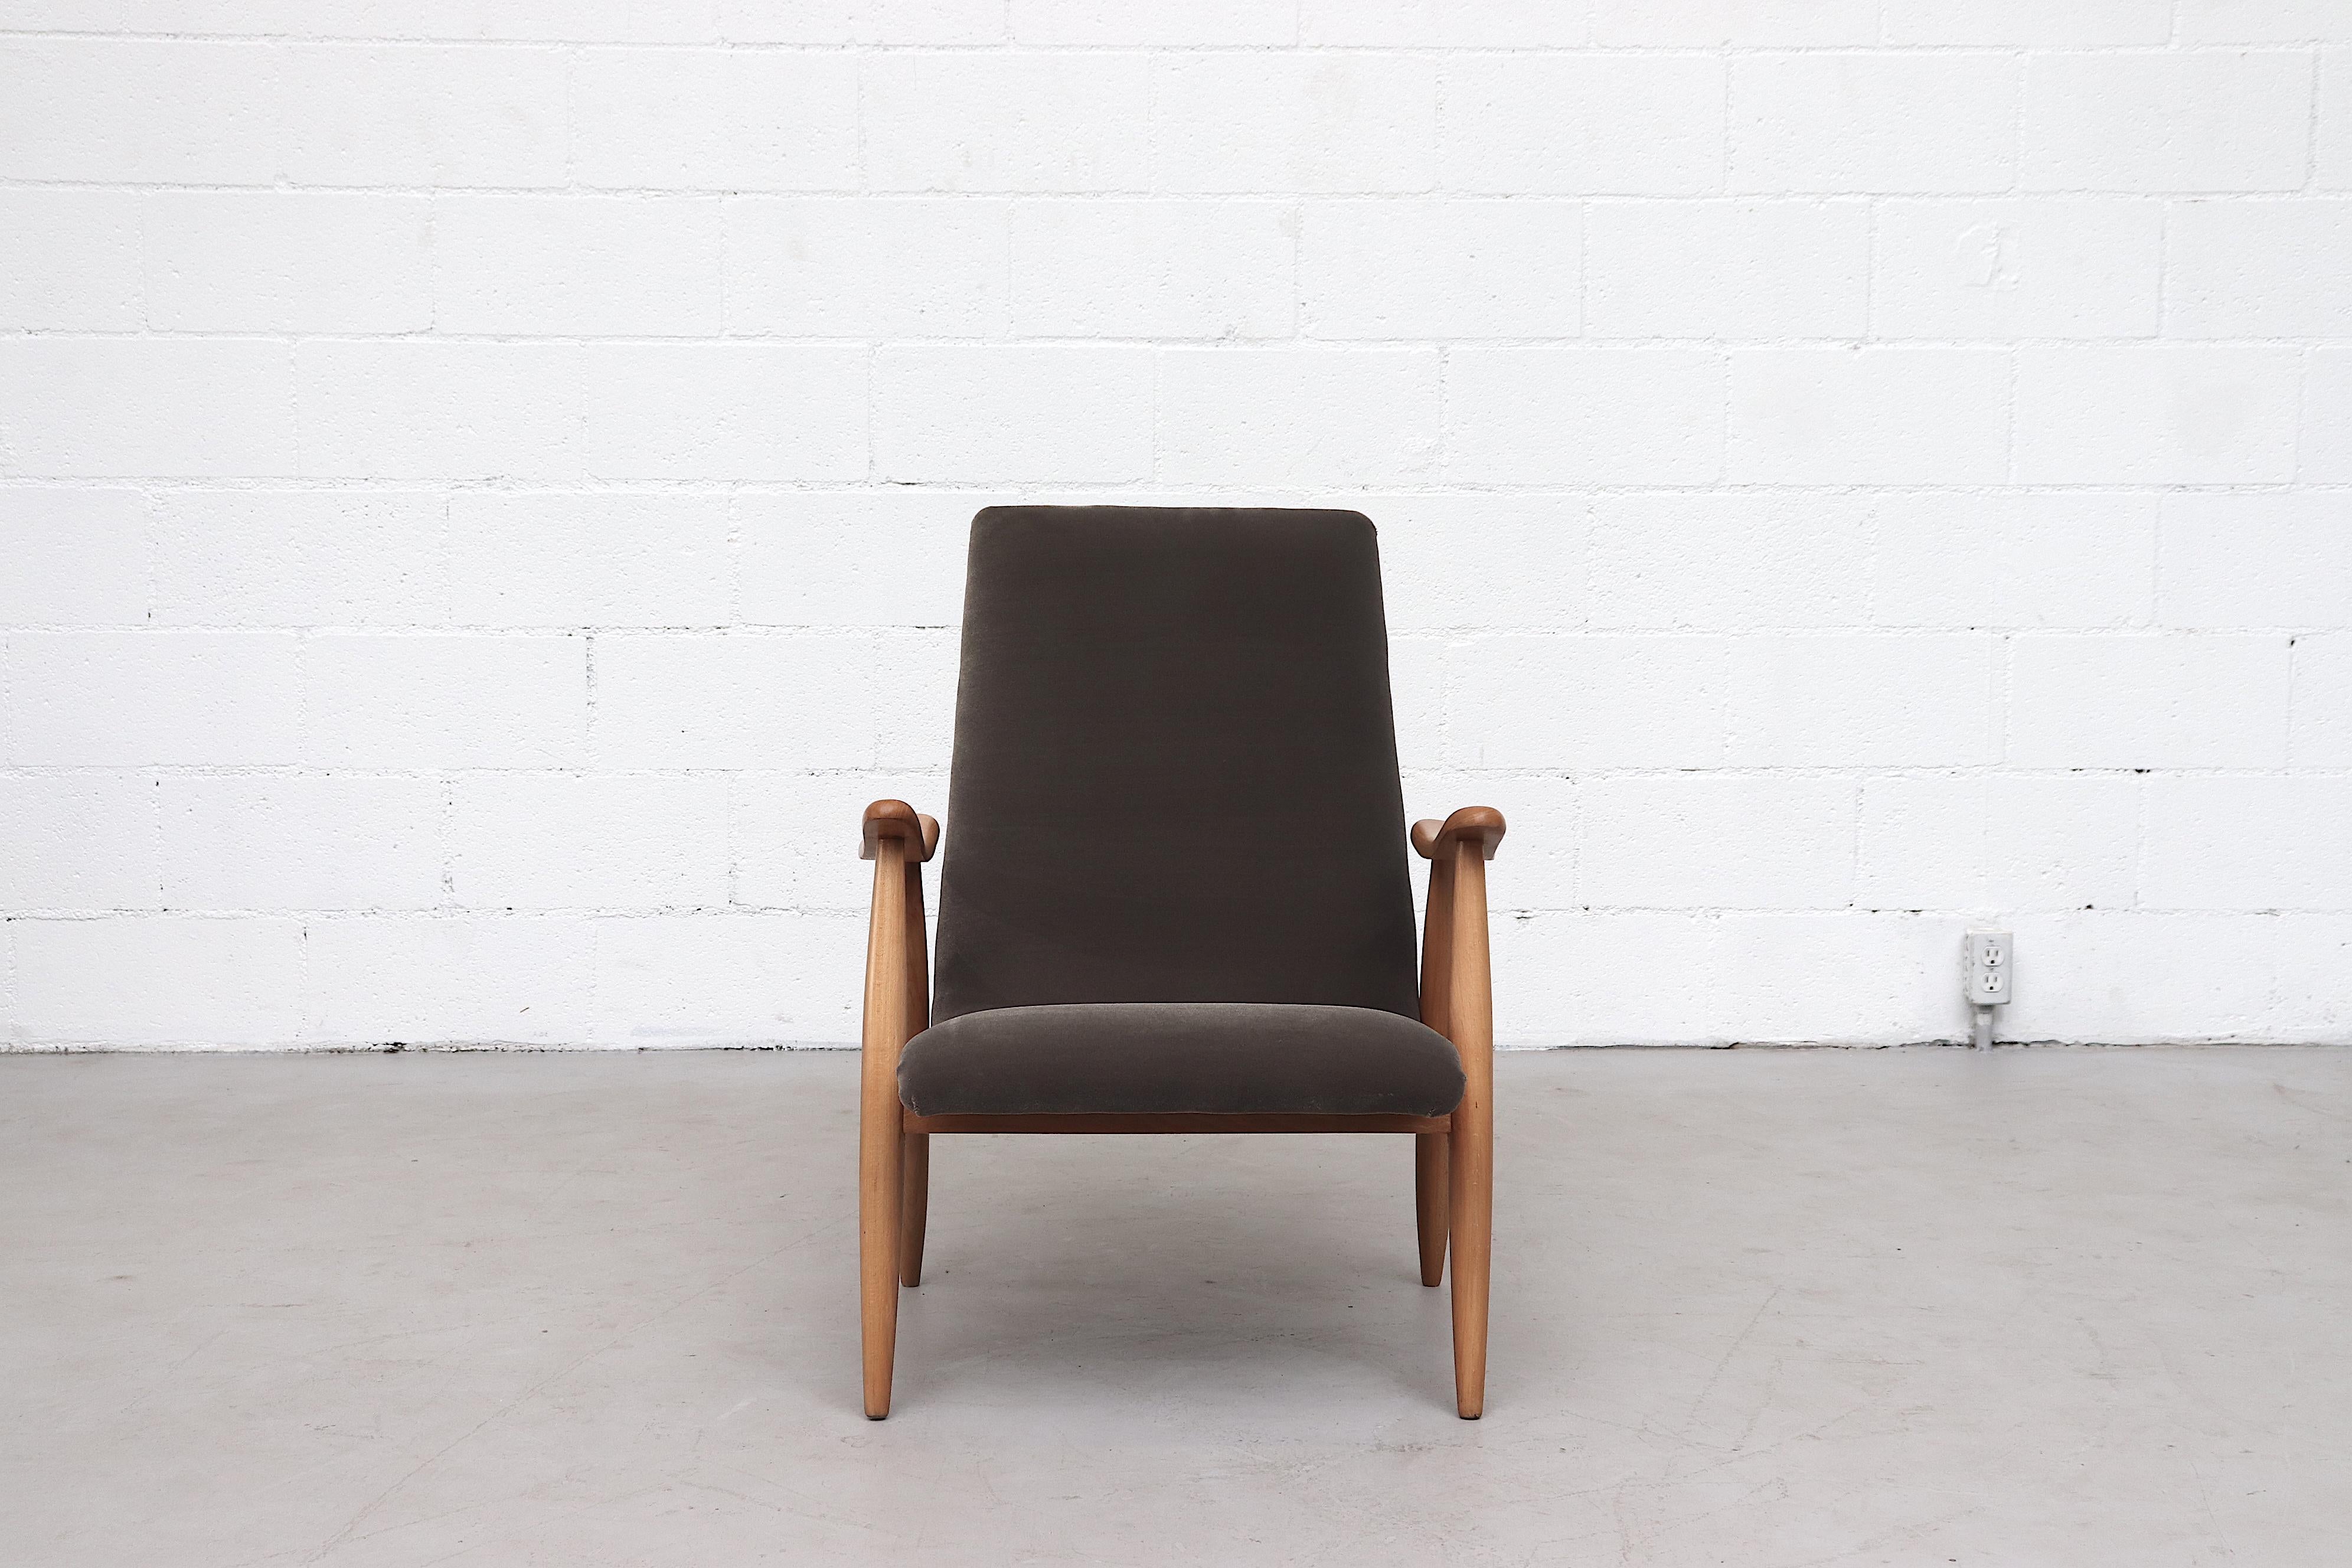 Gorgeous Louis van Teefelen Lounge Chair for Topform with Lightly Refinished Light Teak Frame and Fresh Seal Grey Velvet Upholstery. Elegant Design with Beautiful Curves. In Good Overall Condition. Similar Chairs Also Available Listed Separately.